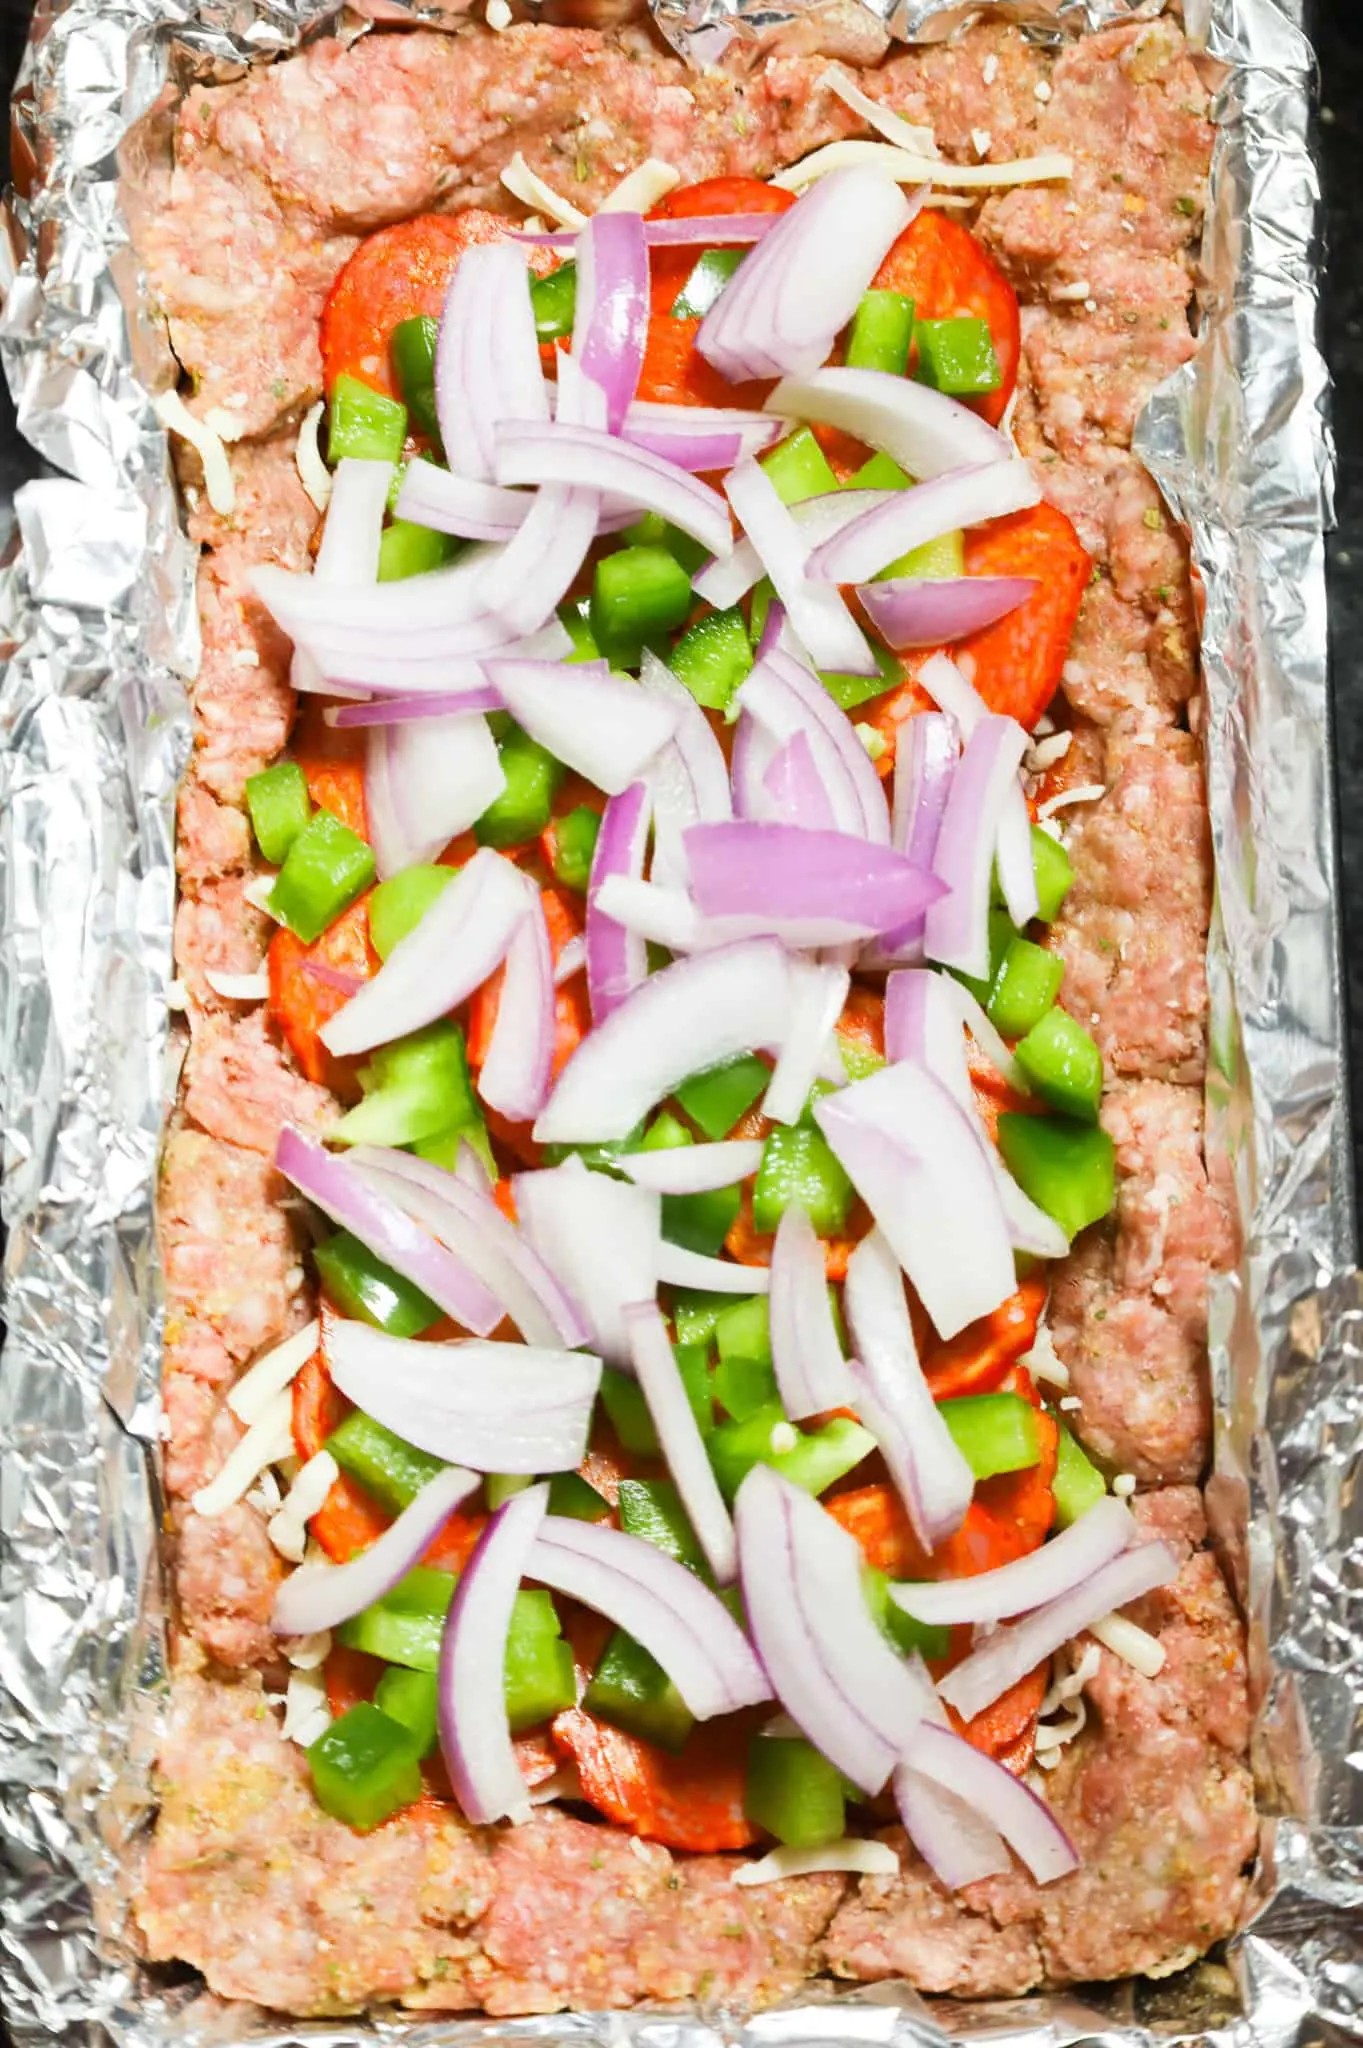 diced red onions, green peppers and pepperoni slices in the center of a meatloaf